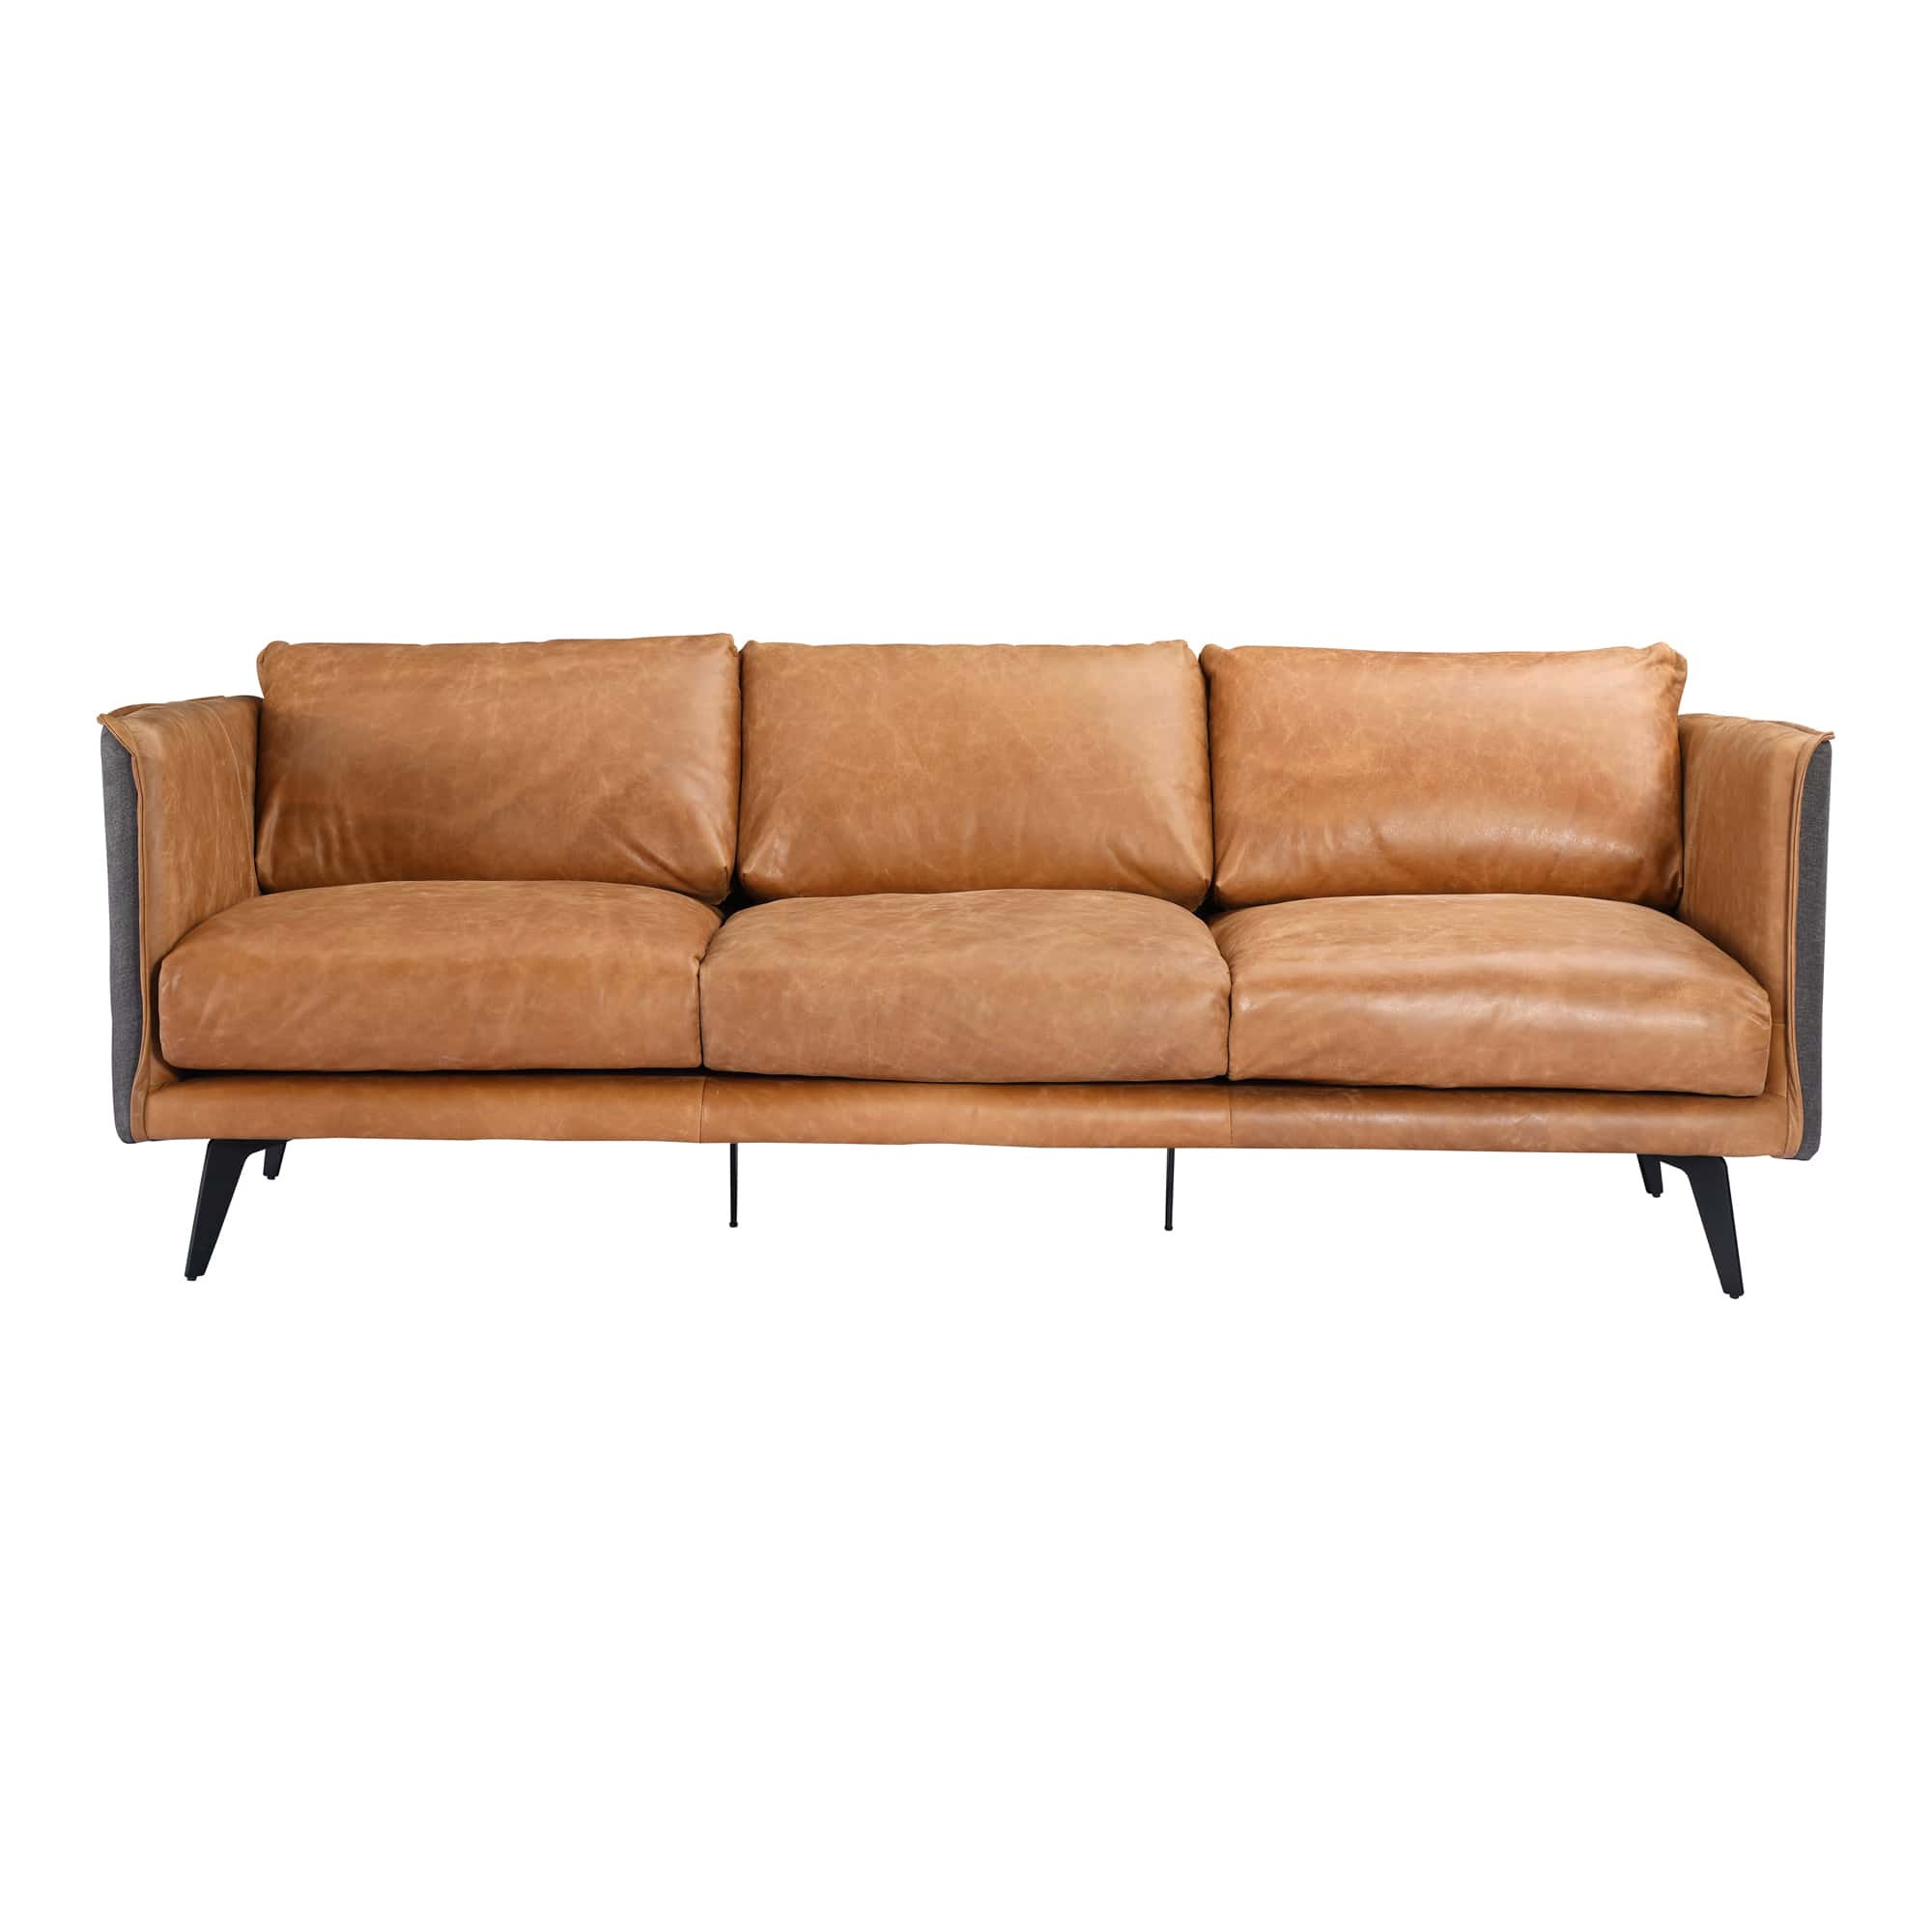 Messina Leather Sofa Cigare Tan Leather by Moe's Home Collection